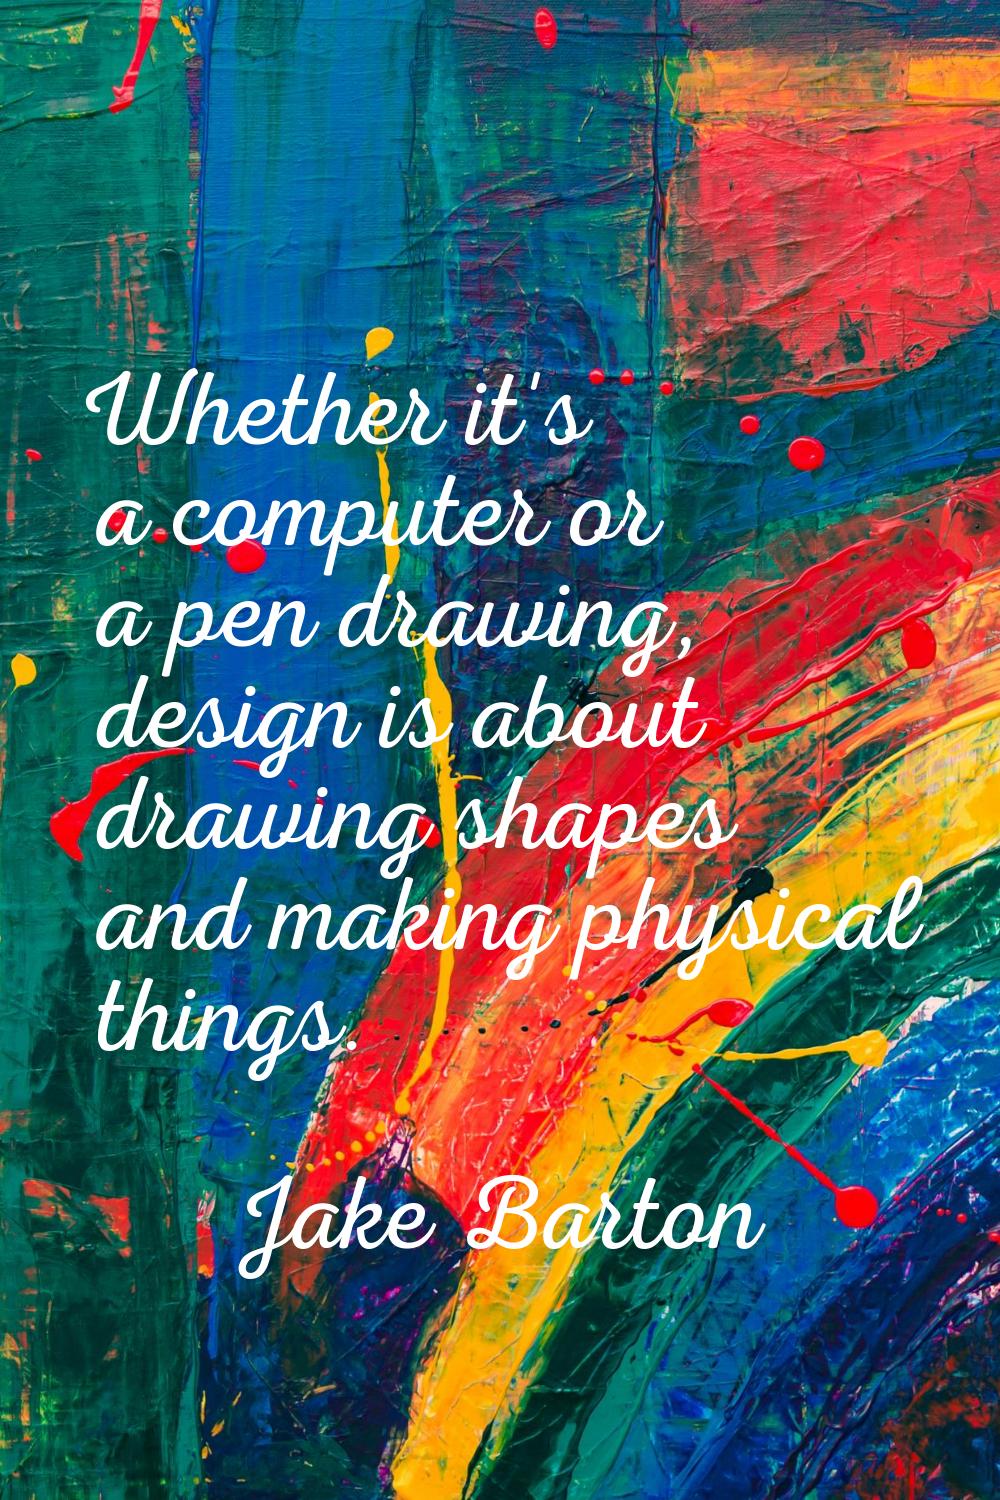 Whether it's a computer or a pen drawing, design is about drawing shapes and making physical things